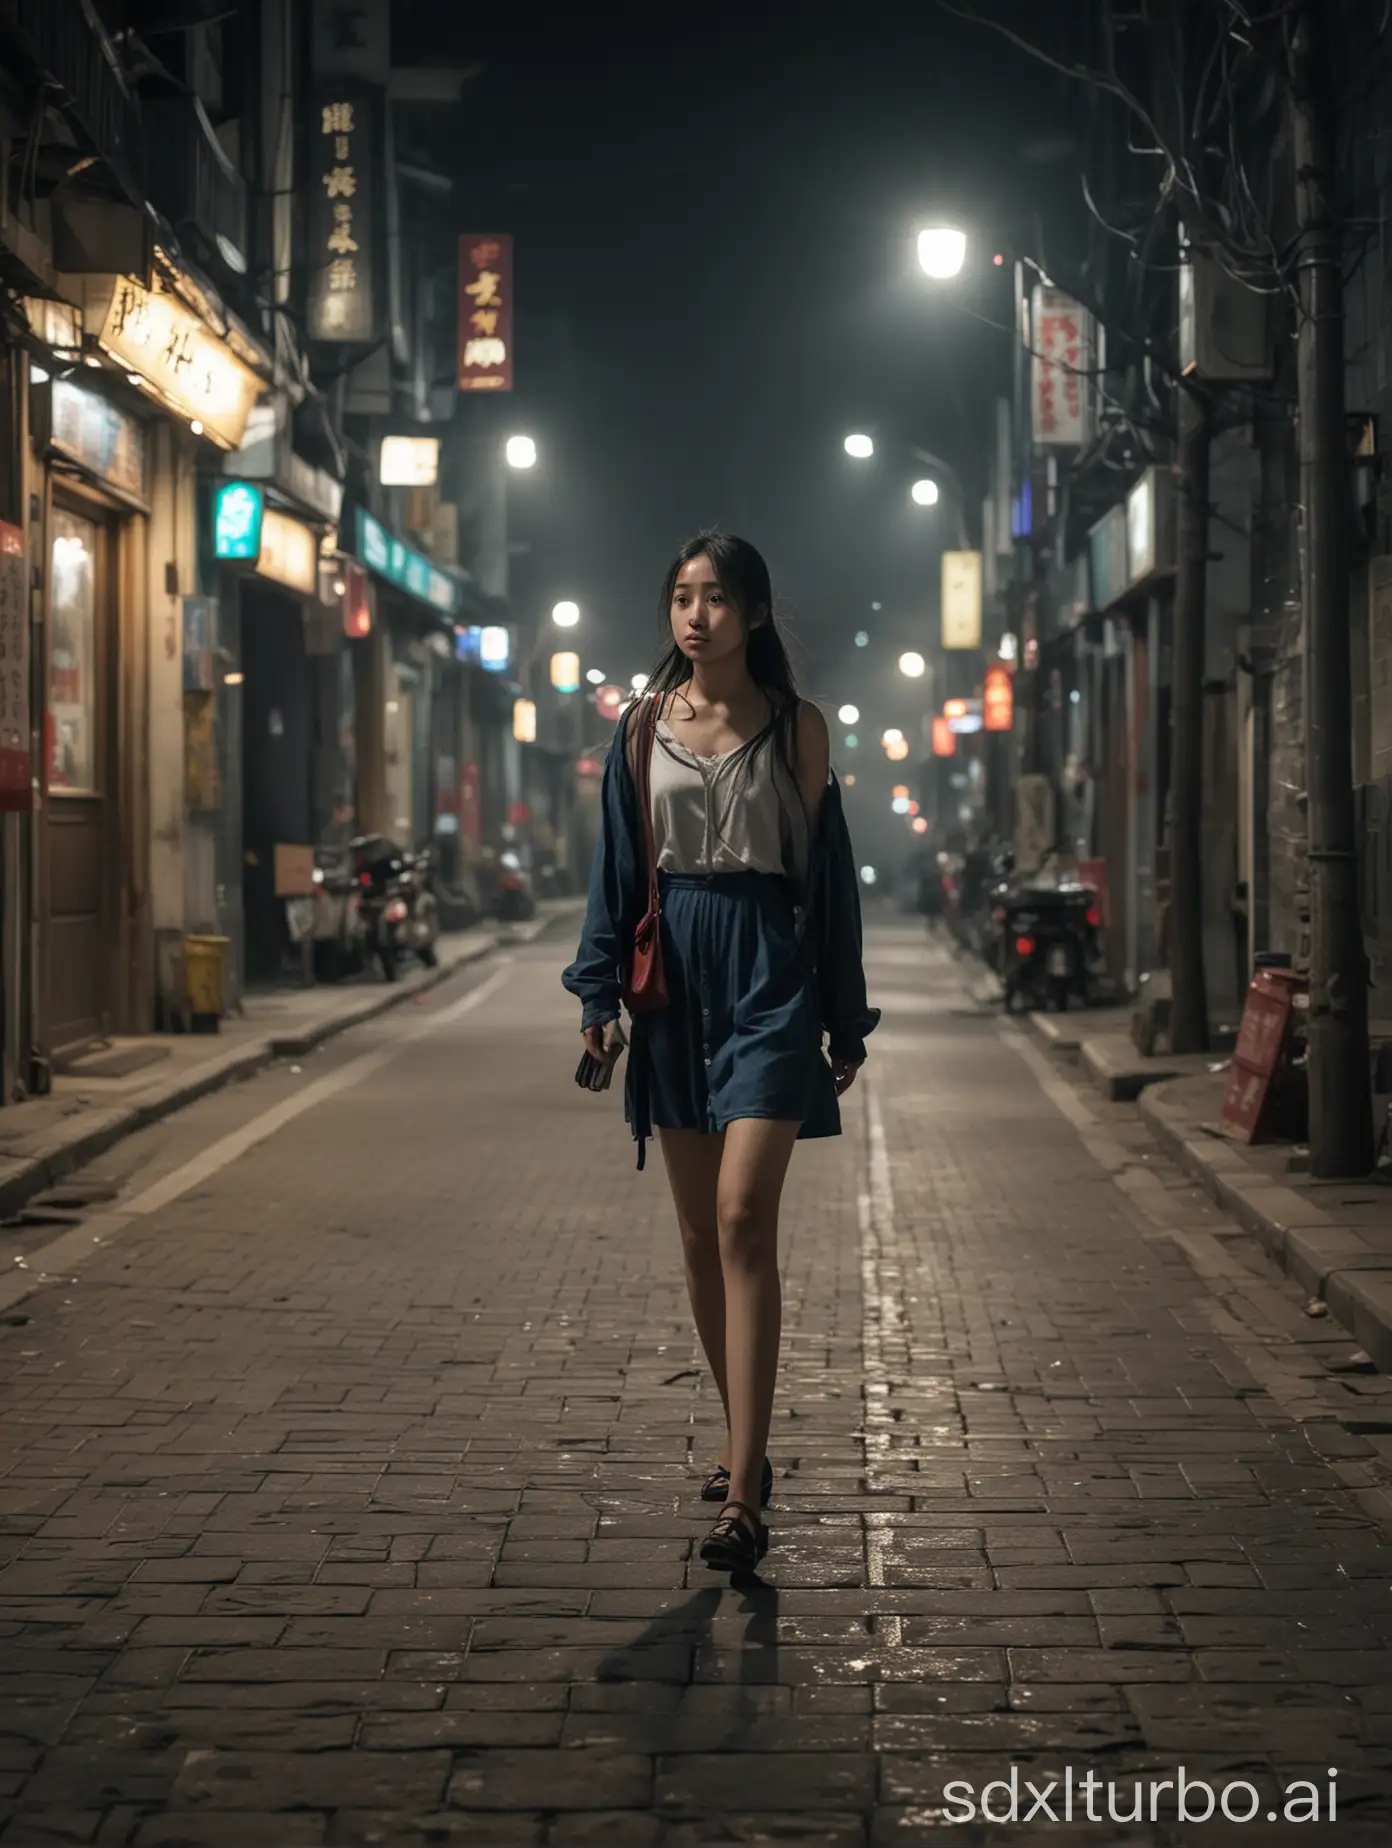 A Chinese girl is walking alone in a lonely and sad way on the city street at night